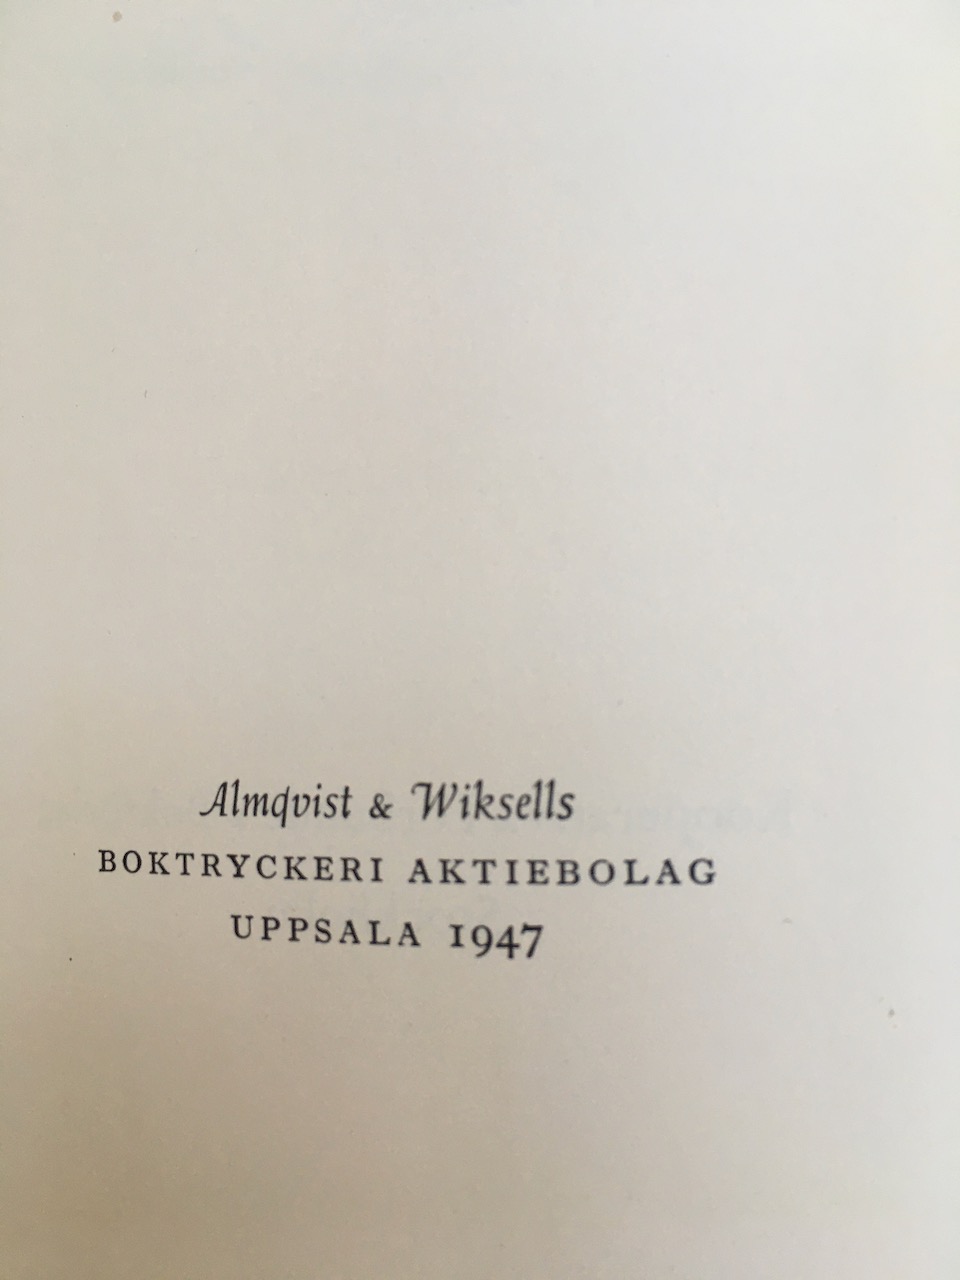 Hompen, 1947, first Swedish edition - first translation of The Hobbit into any language 16